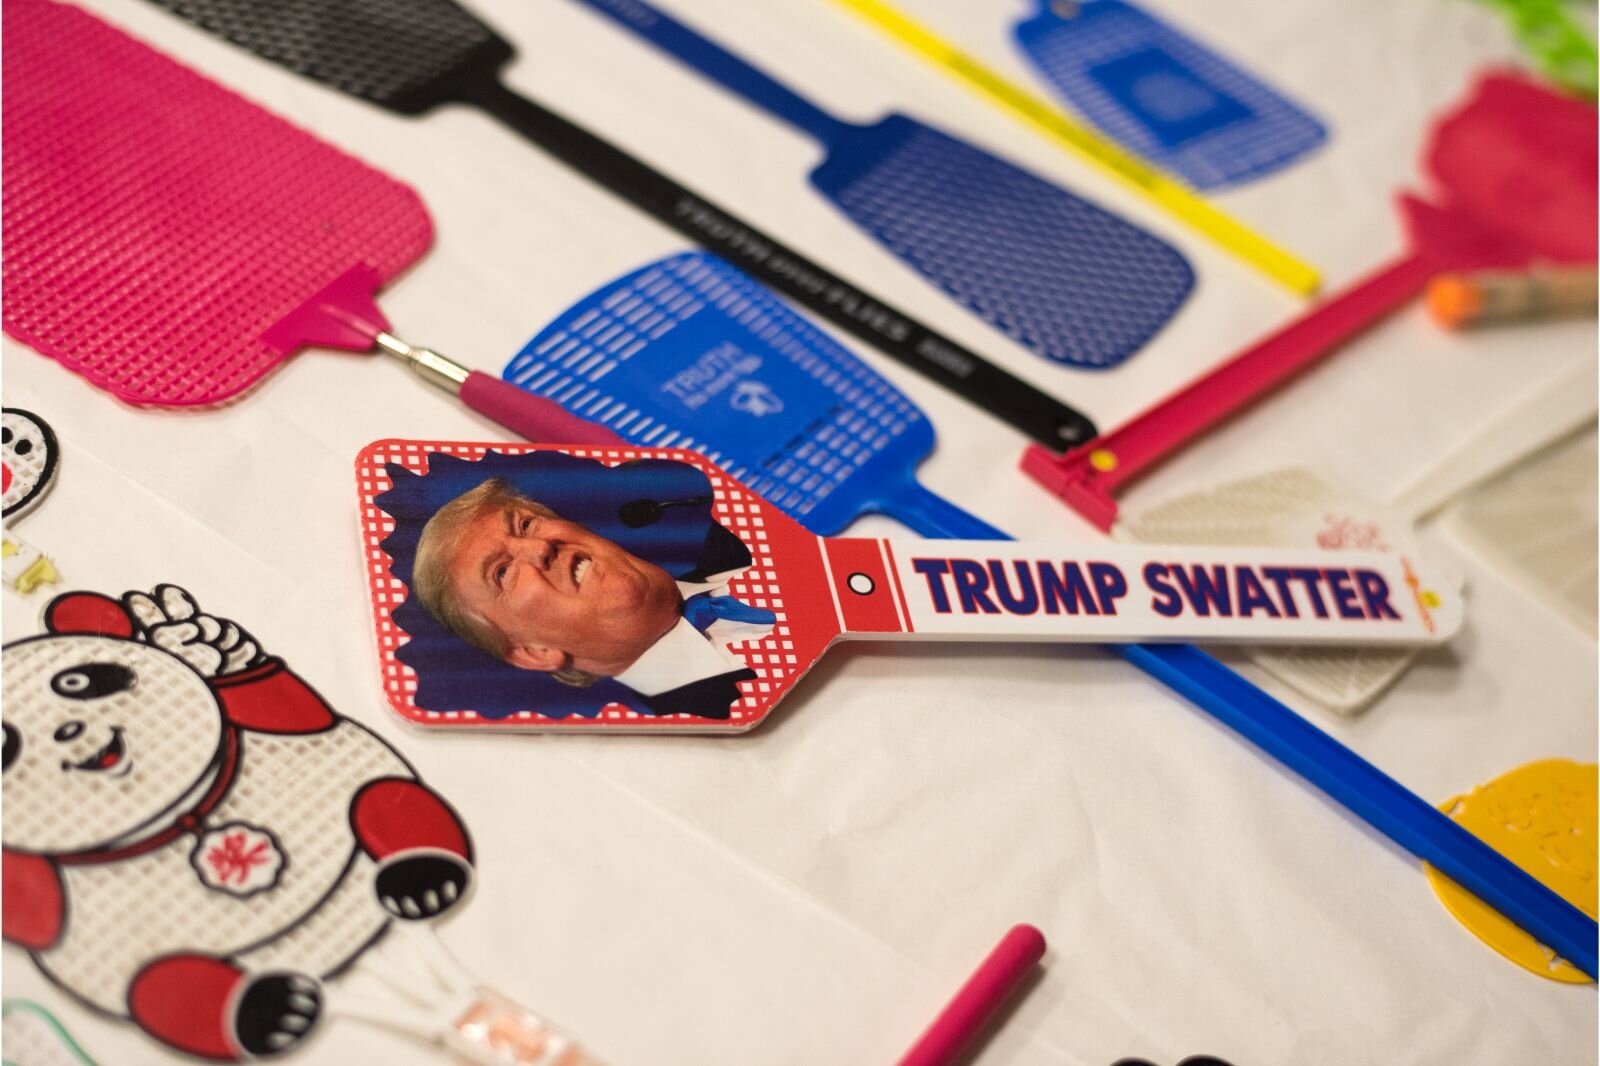 A flyswatter depicting former U.S. president, Donald Trump. One of the several American Politically-themed swatters.